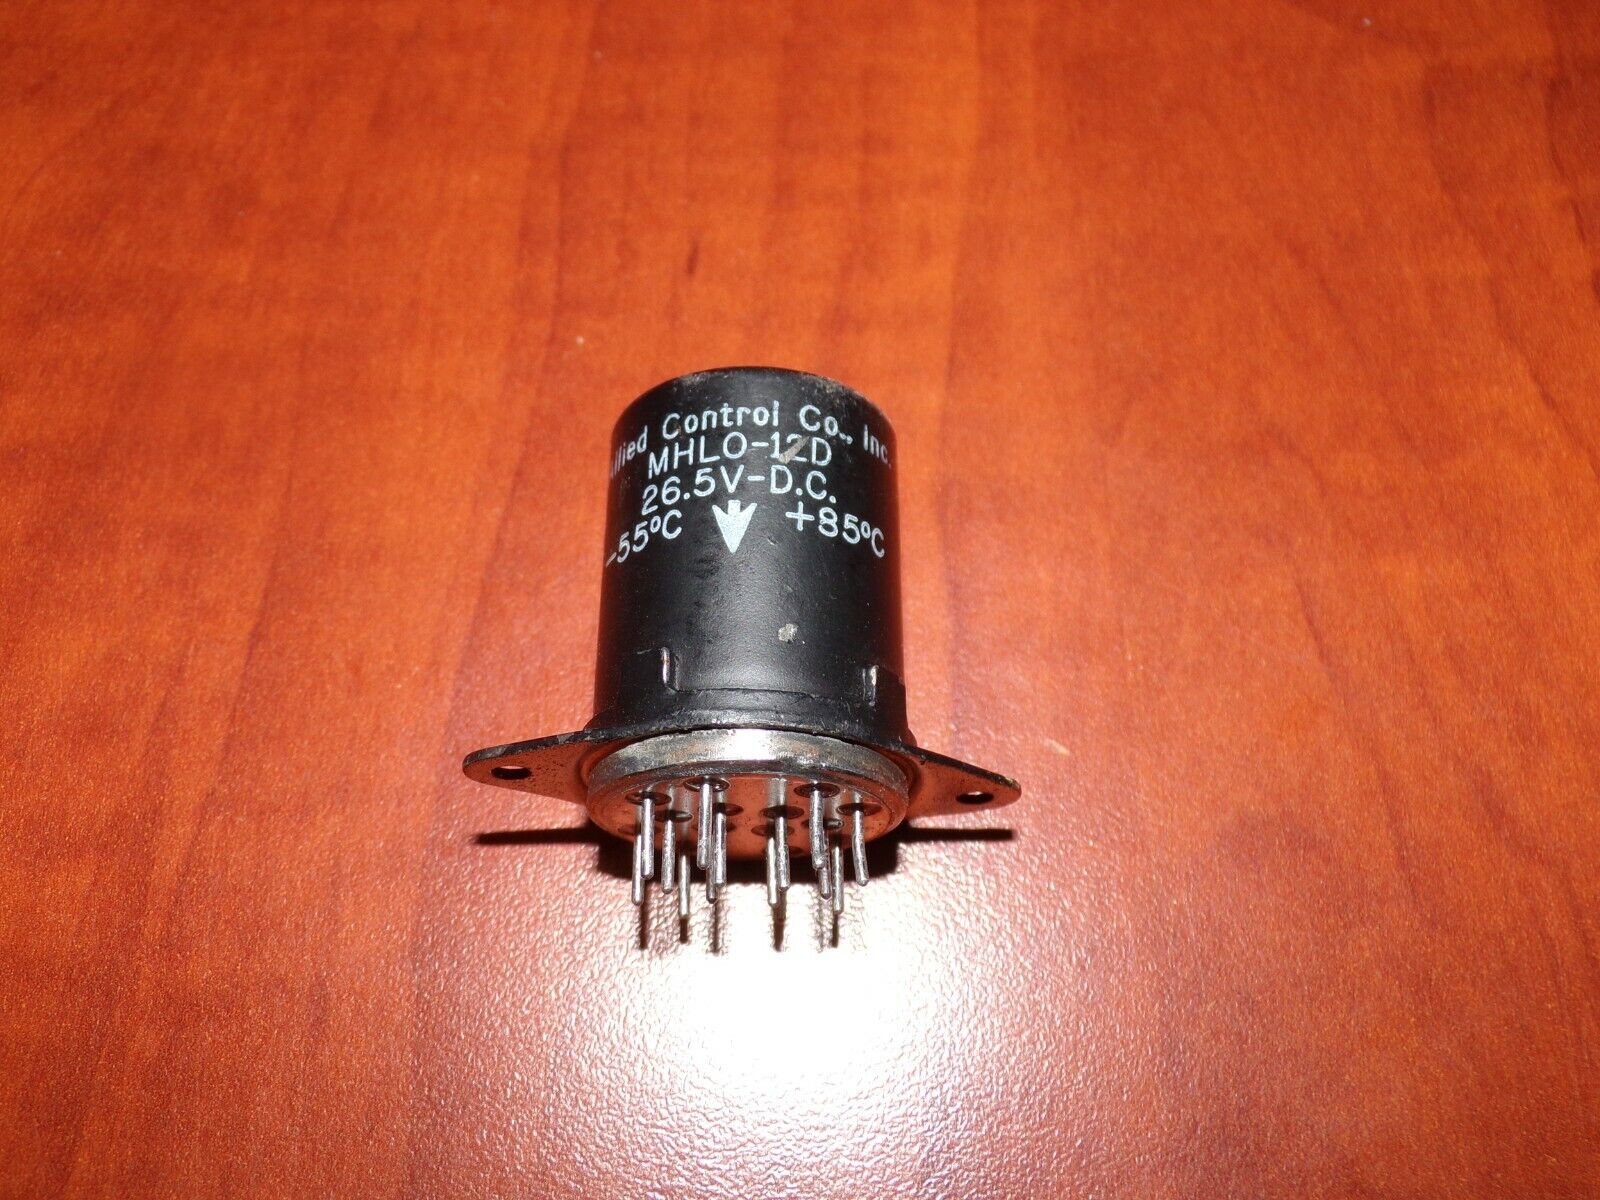 Aircraft 26.5v 300 ohm Relay MHLO-12D Allied Controls